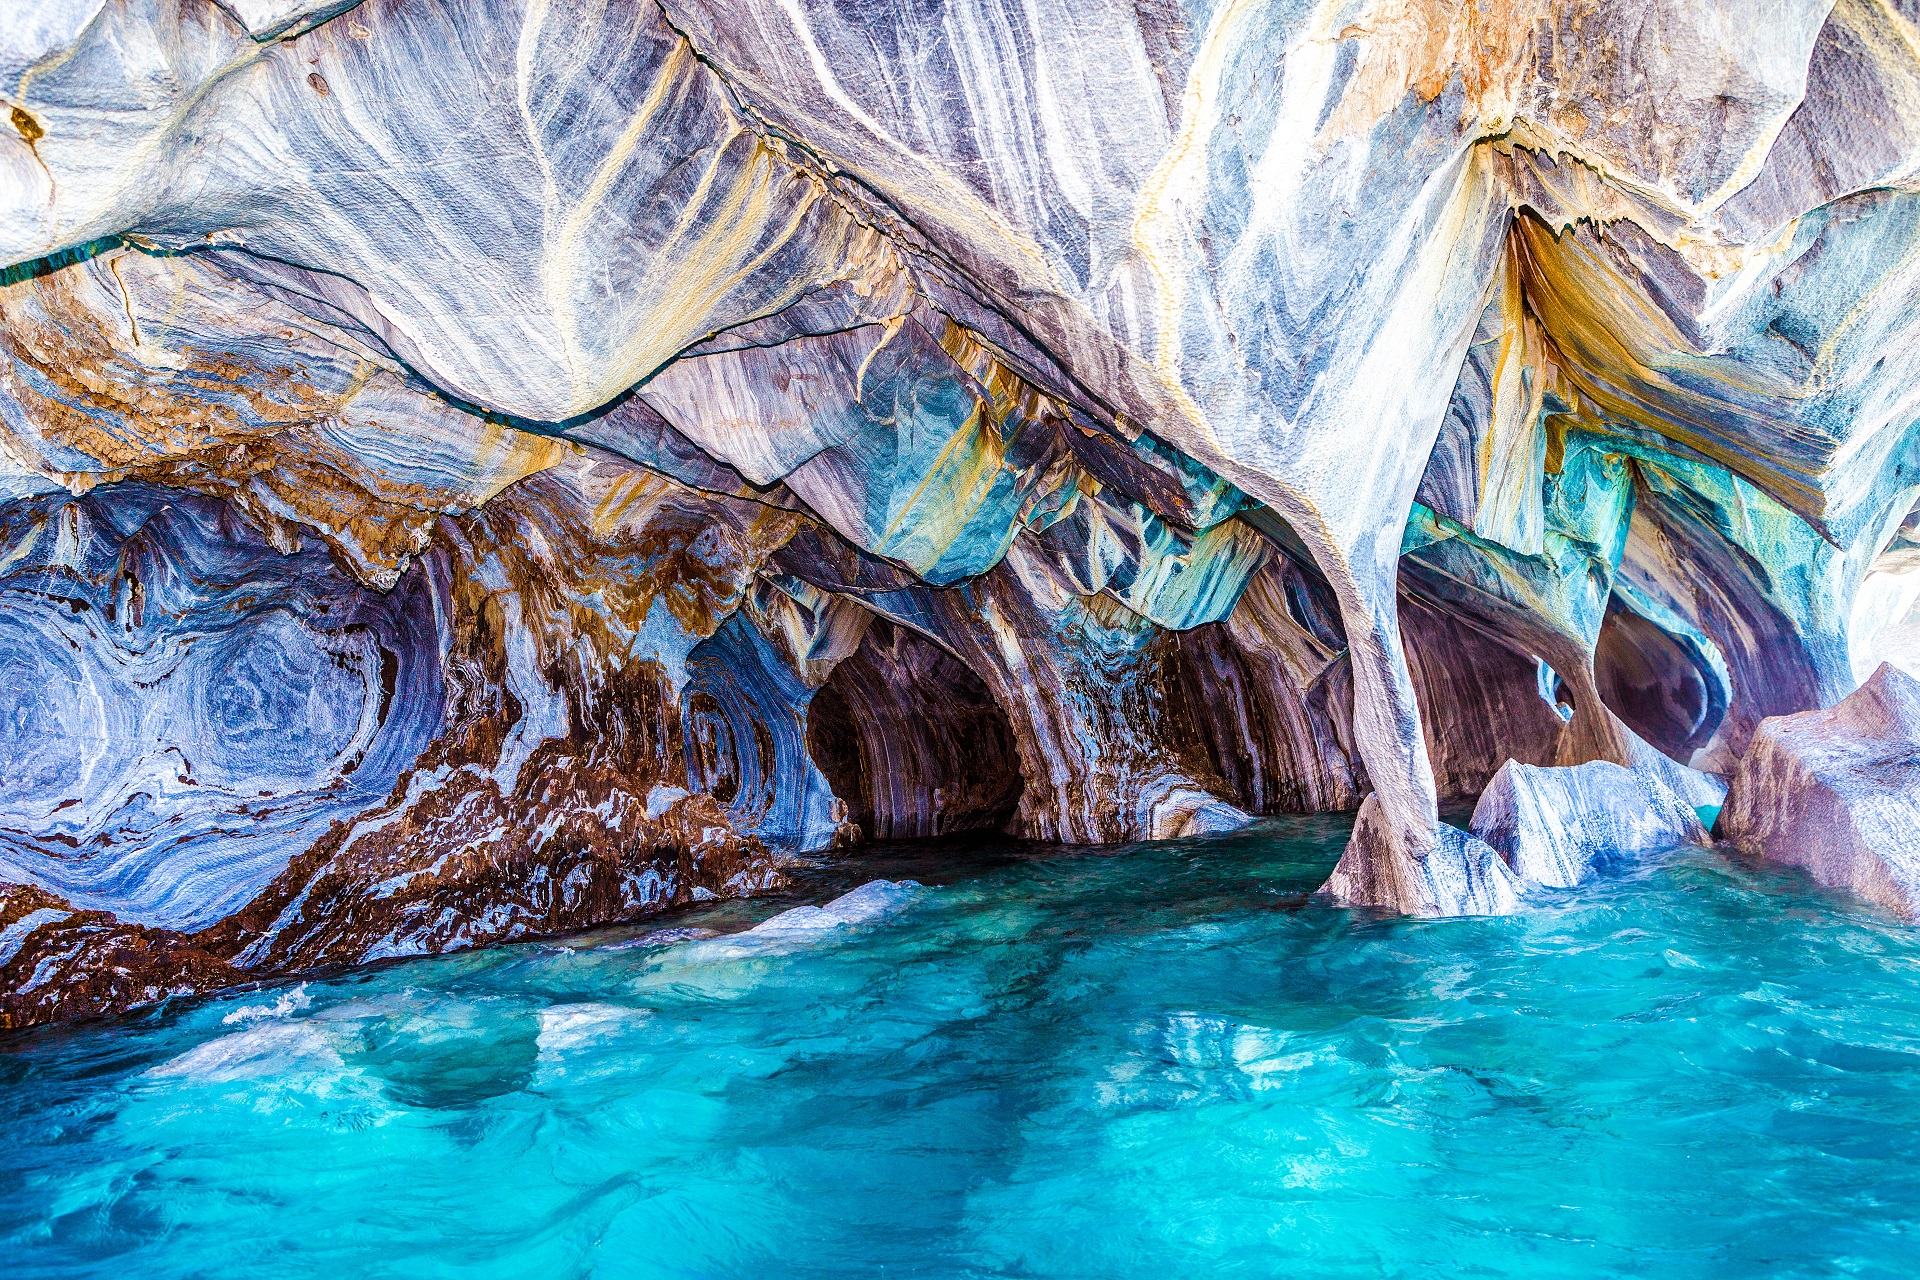 stunning places in the world that should be on your bucket list